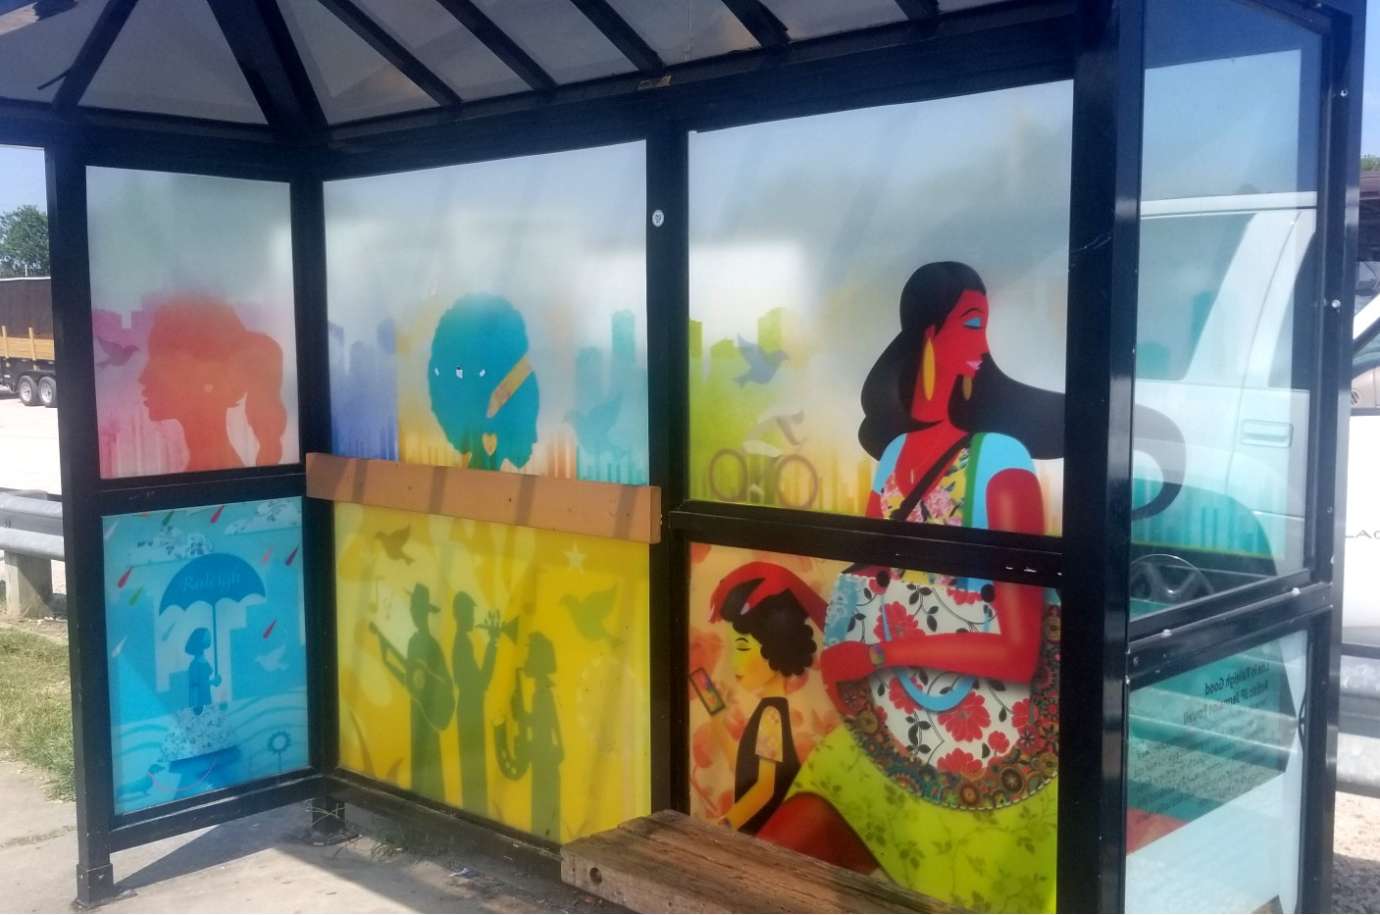 artwork by JP Jermaine Powell covering the windows of a bus shelter